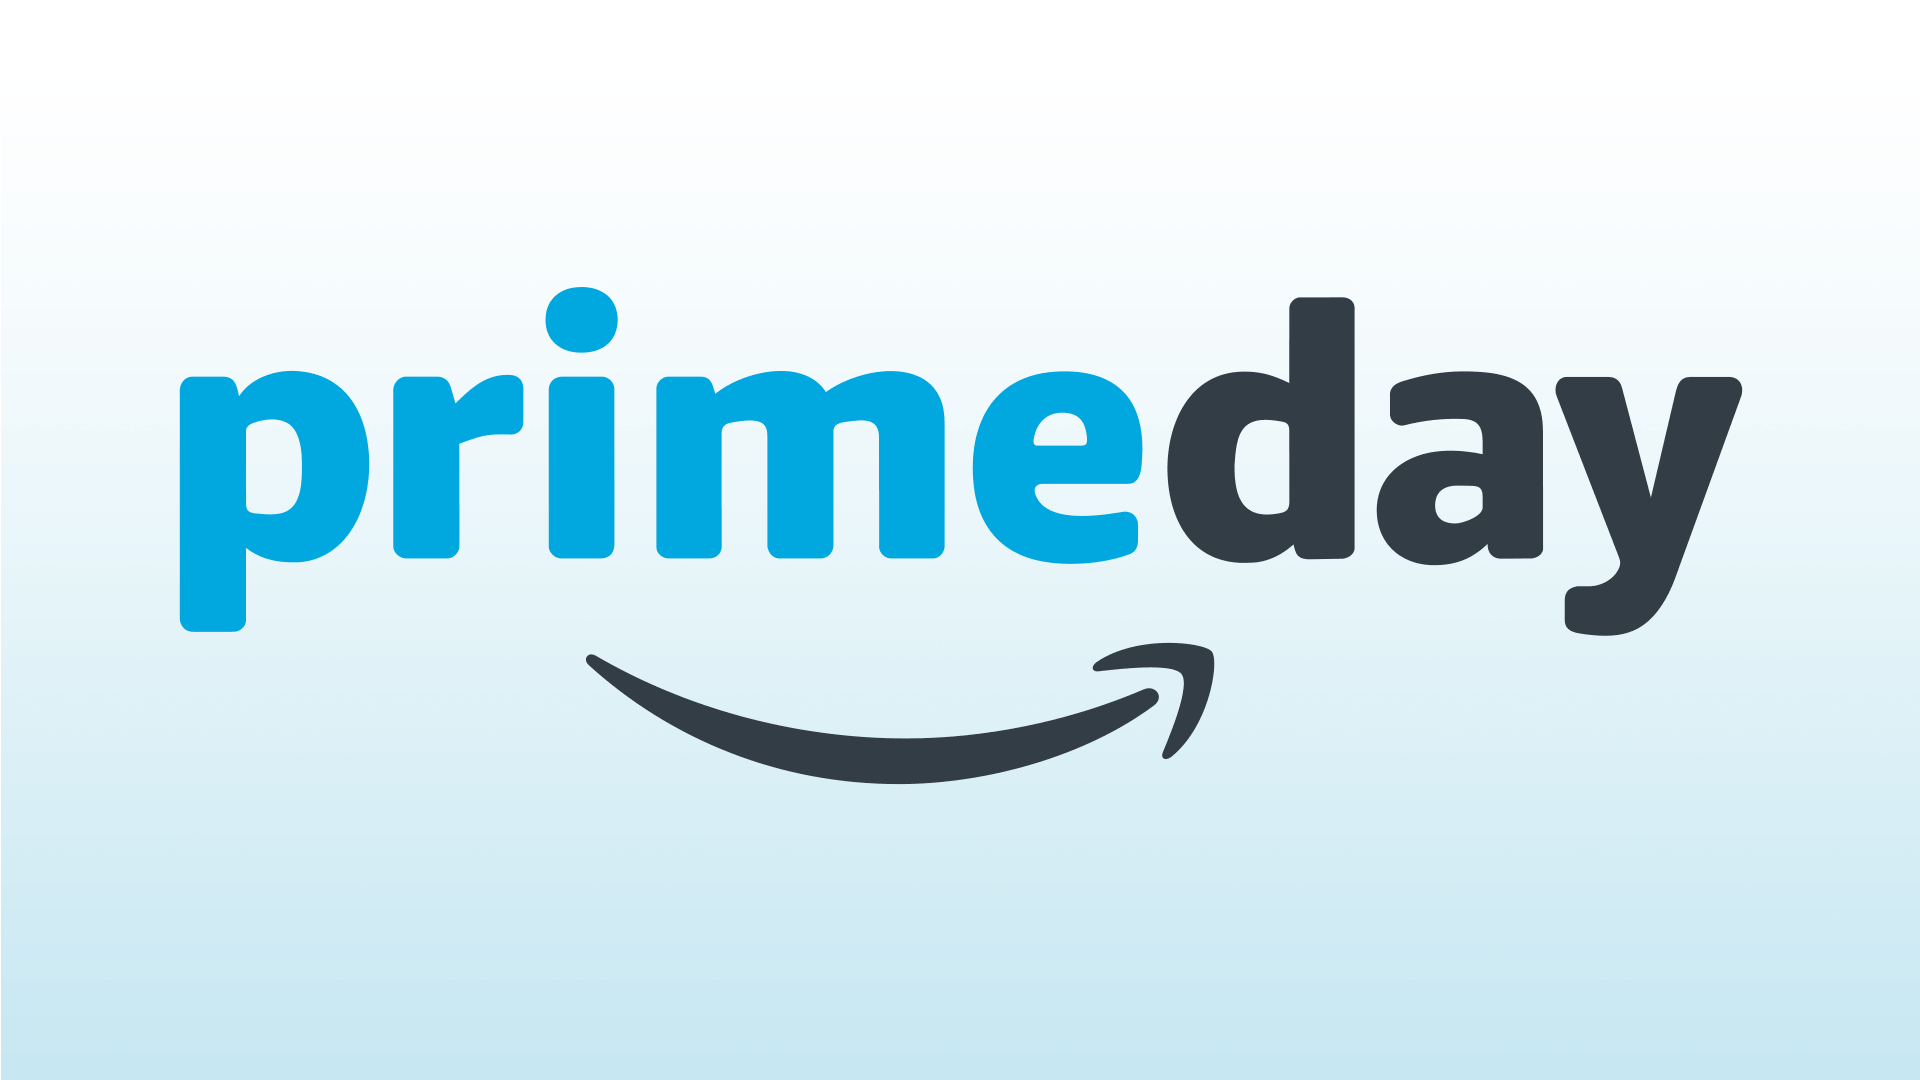 download prime day